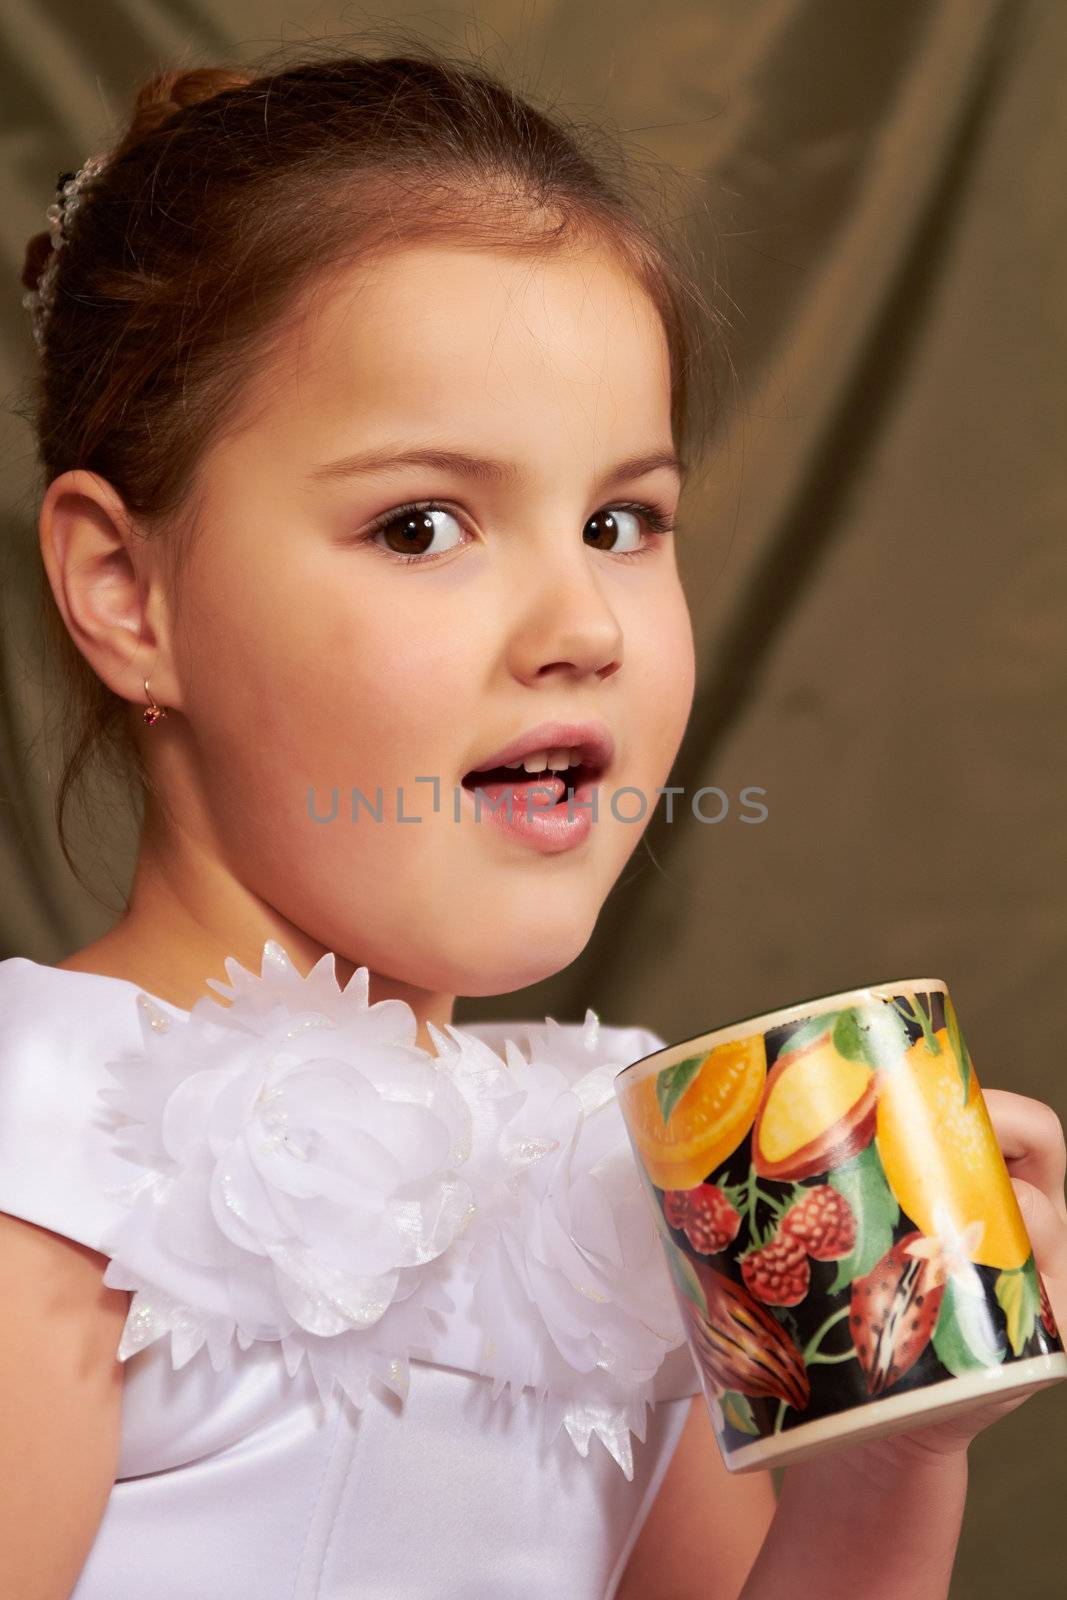 The little girl in a white dress drinks from a large mug.